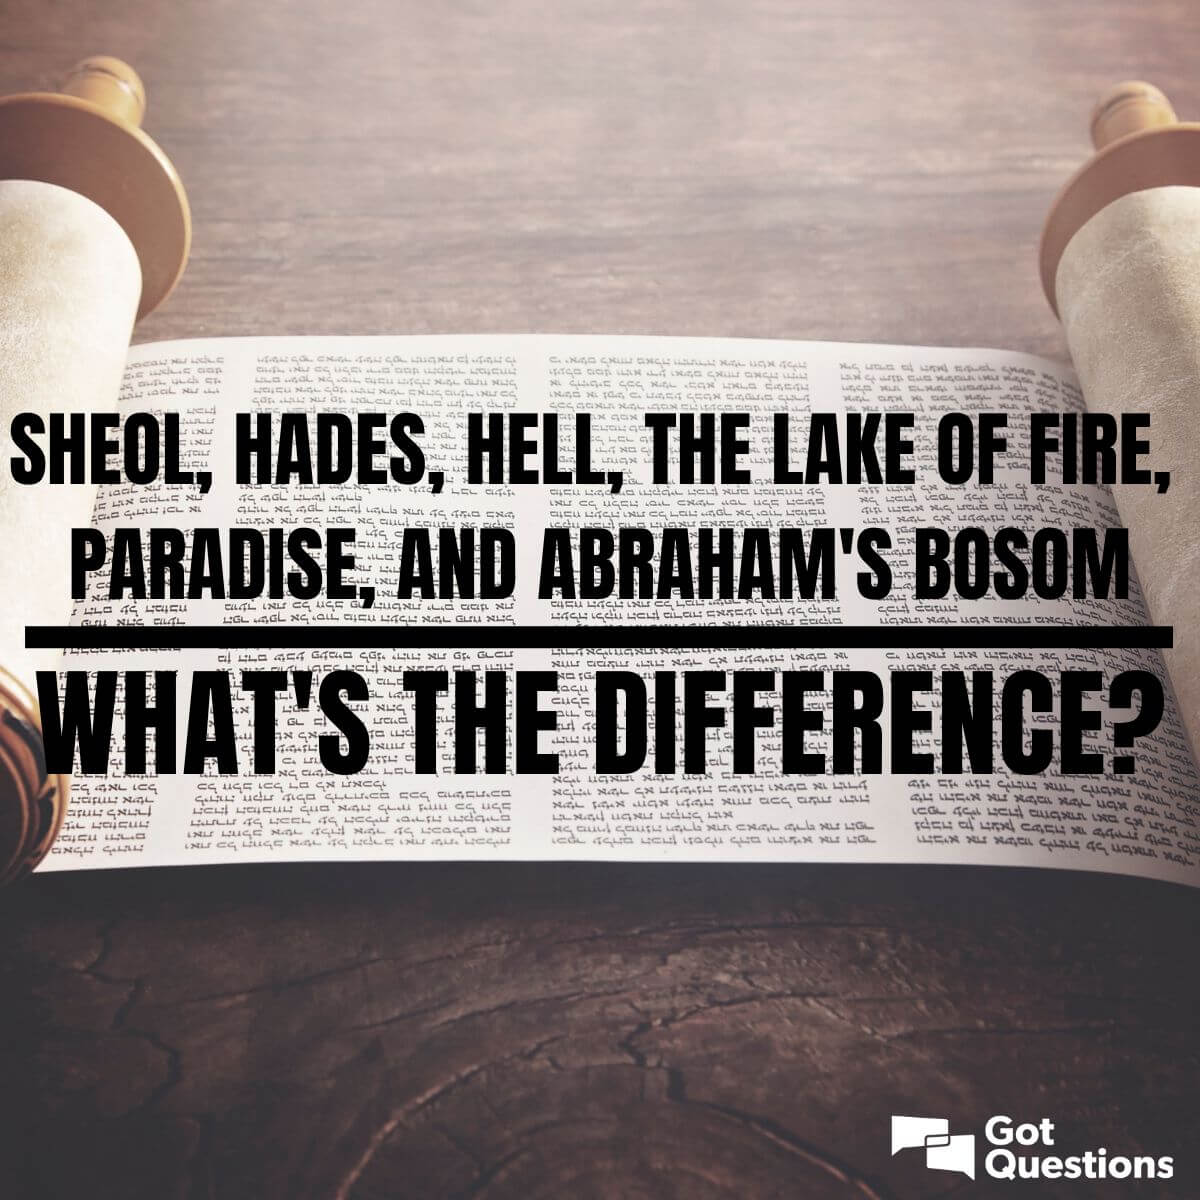 What is the difference between Sheol, Hades, Hell, the lake of fire